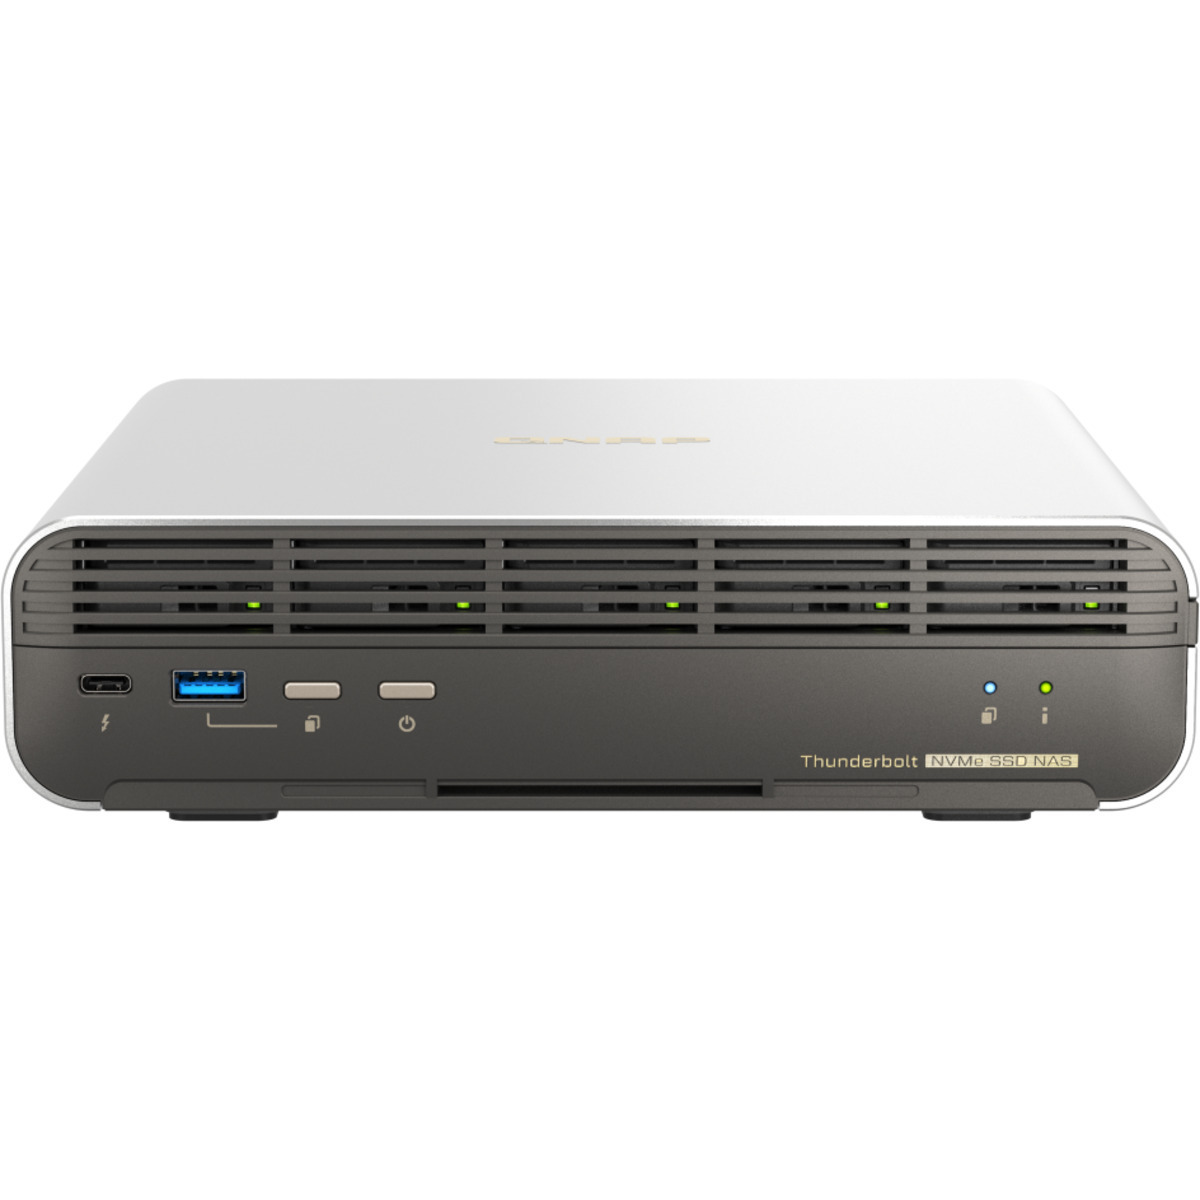 QNAP TBS-h574TX Core i3 Thunderbolt 4 2tb 5-Bay Desktop Multimedia / Power User / Business DAS-NAS - Combo Direct + Network Storage Device 4x500gb Crucial P3 Plus CT500P3PSSD8  4700/1900MB/s M.2 2280 NVMe SSD CONSUMER Class Drives Installed - Burn-In Tested TBS-h574TX Core i3 Thunderbolt 4